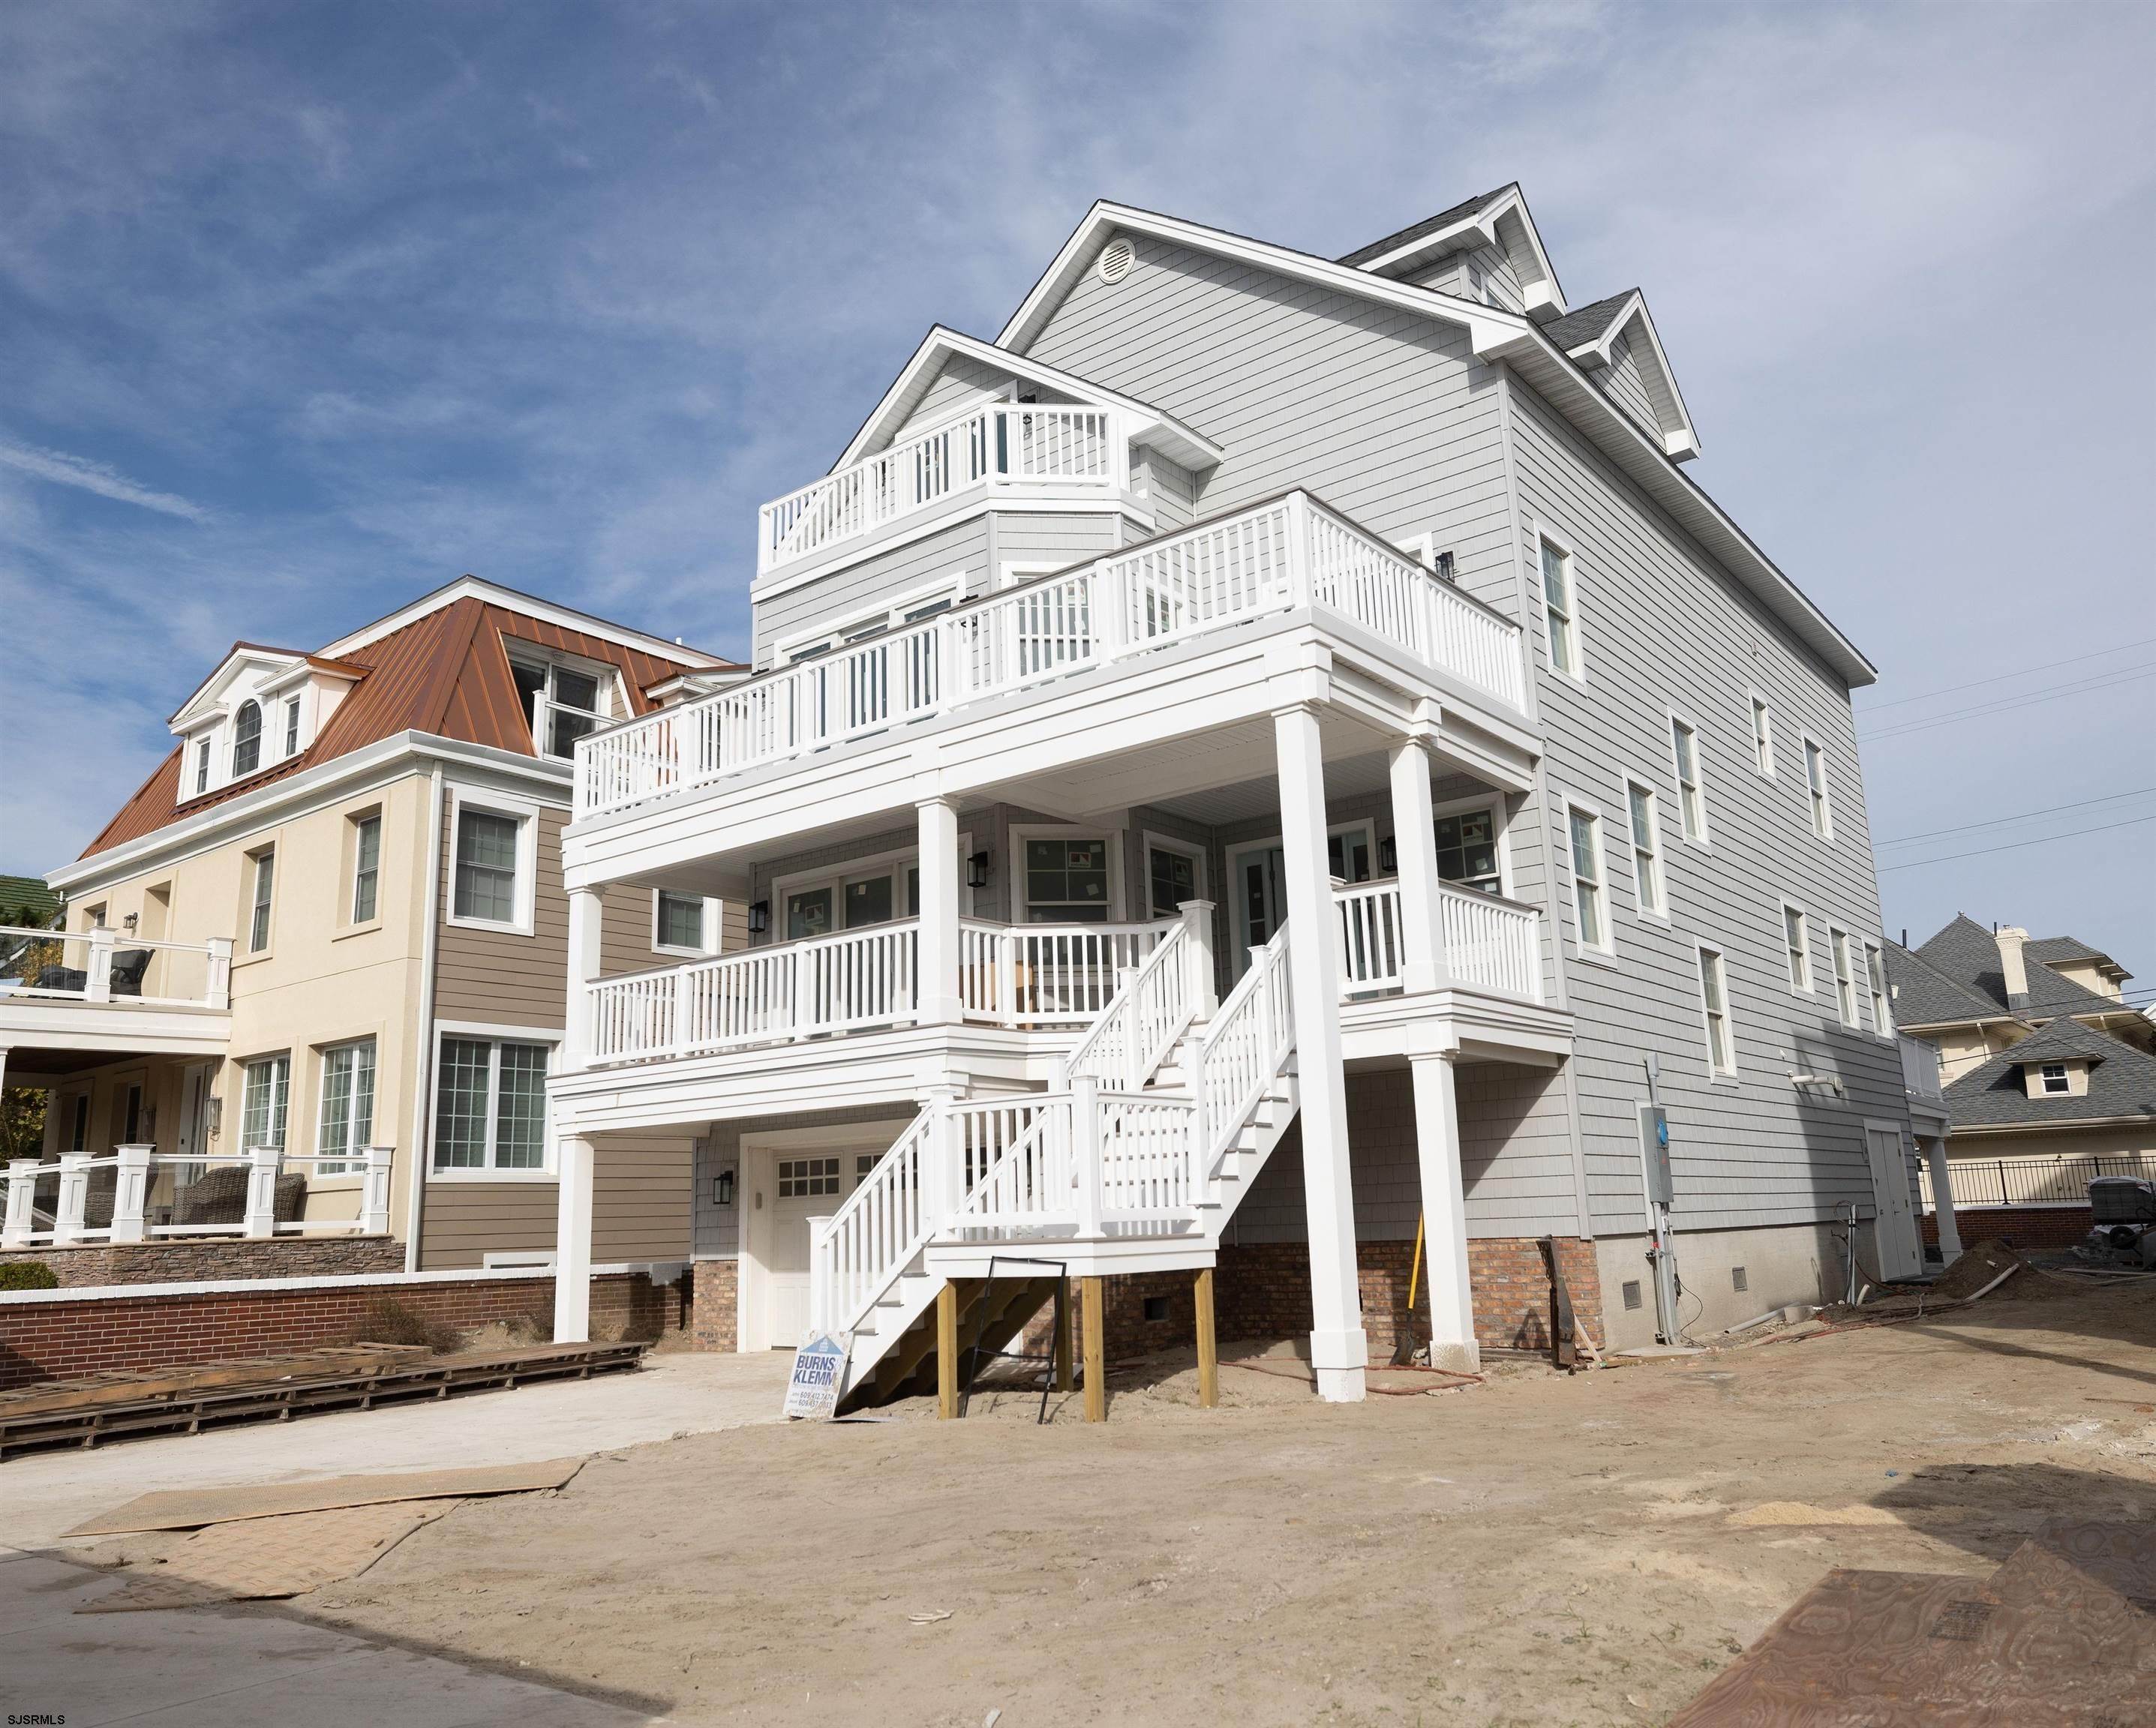 Single Family Homes for Sale at 107 S Cambridge Avenue Ventnor, New Jersey 08406 United States